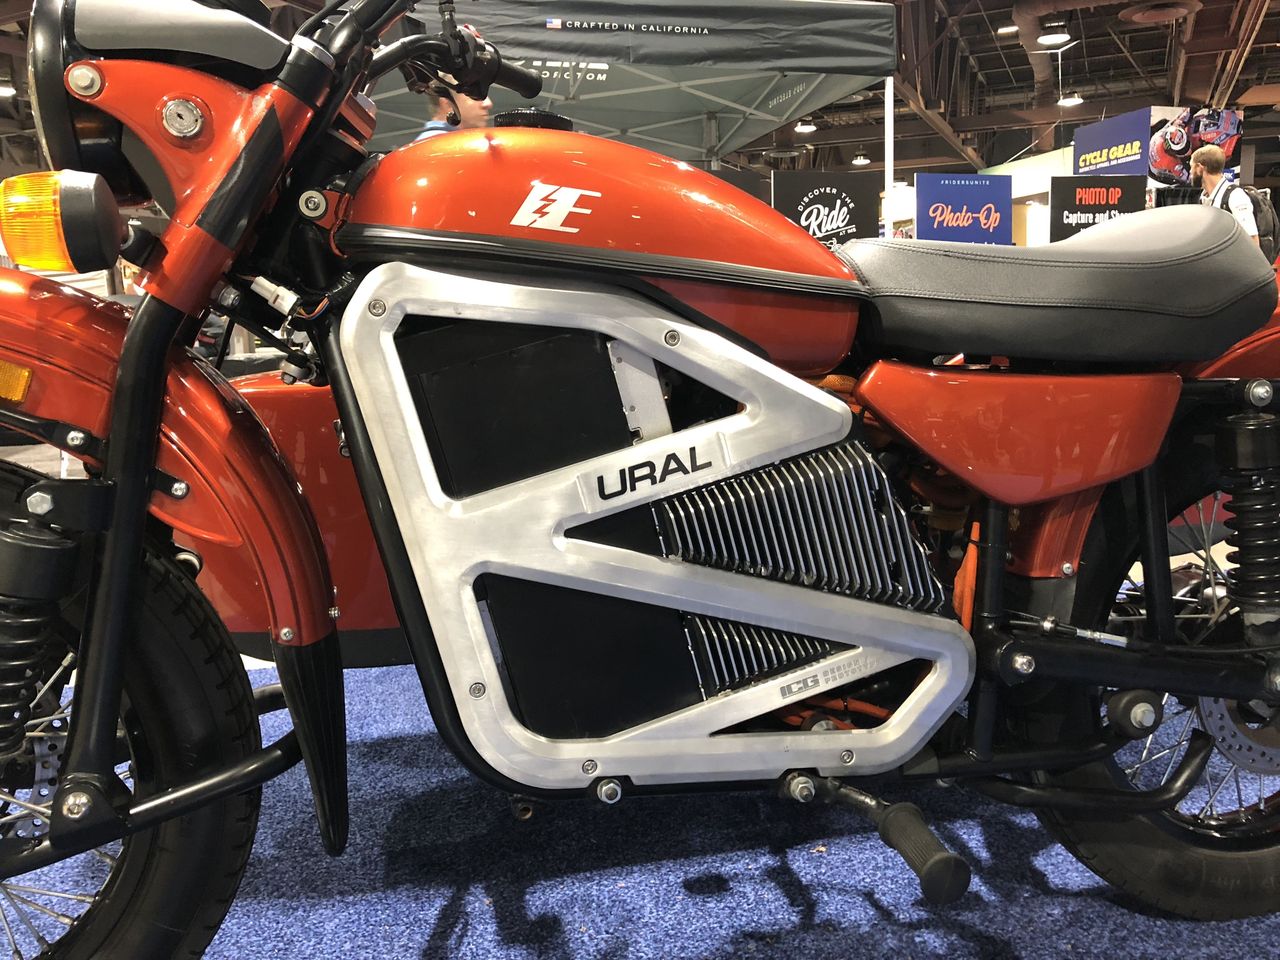 The E-Ural features an electric motor and a battery housed under the seat in the sidecar 